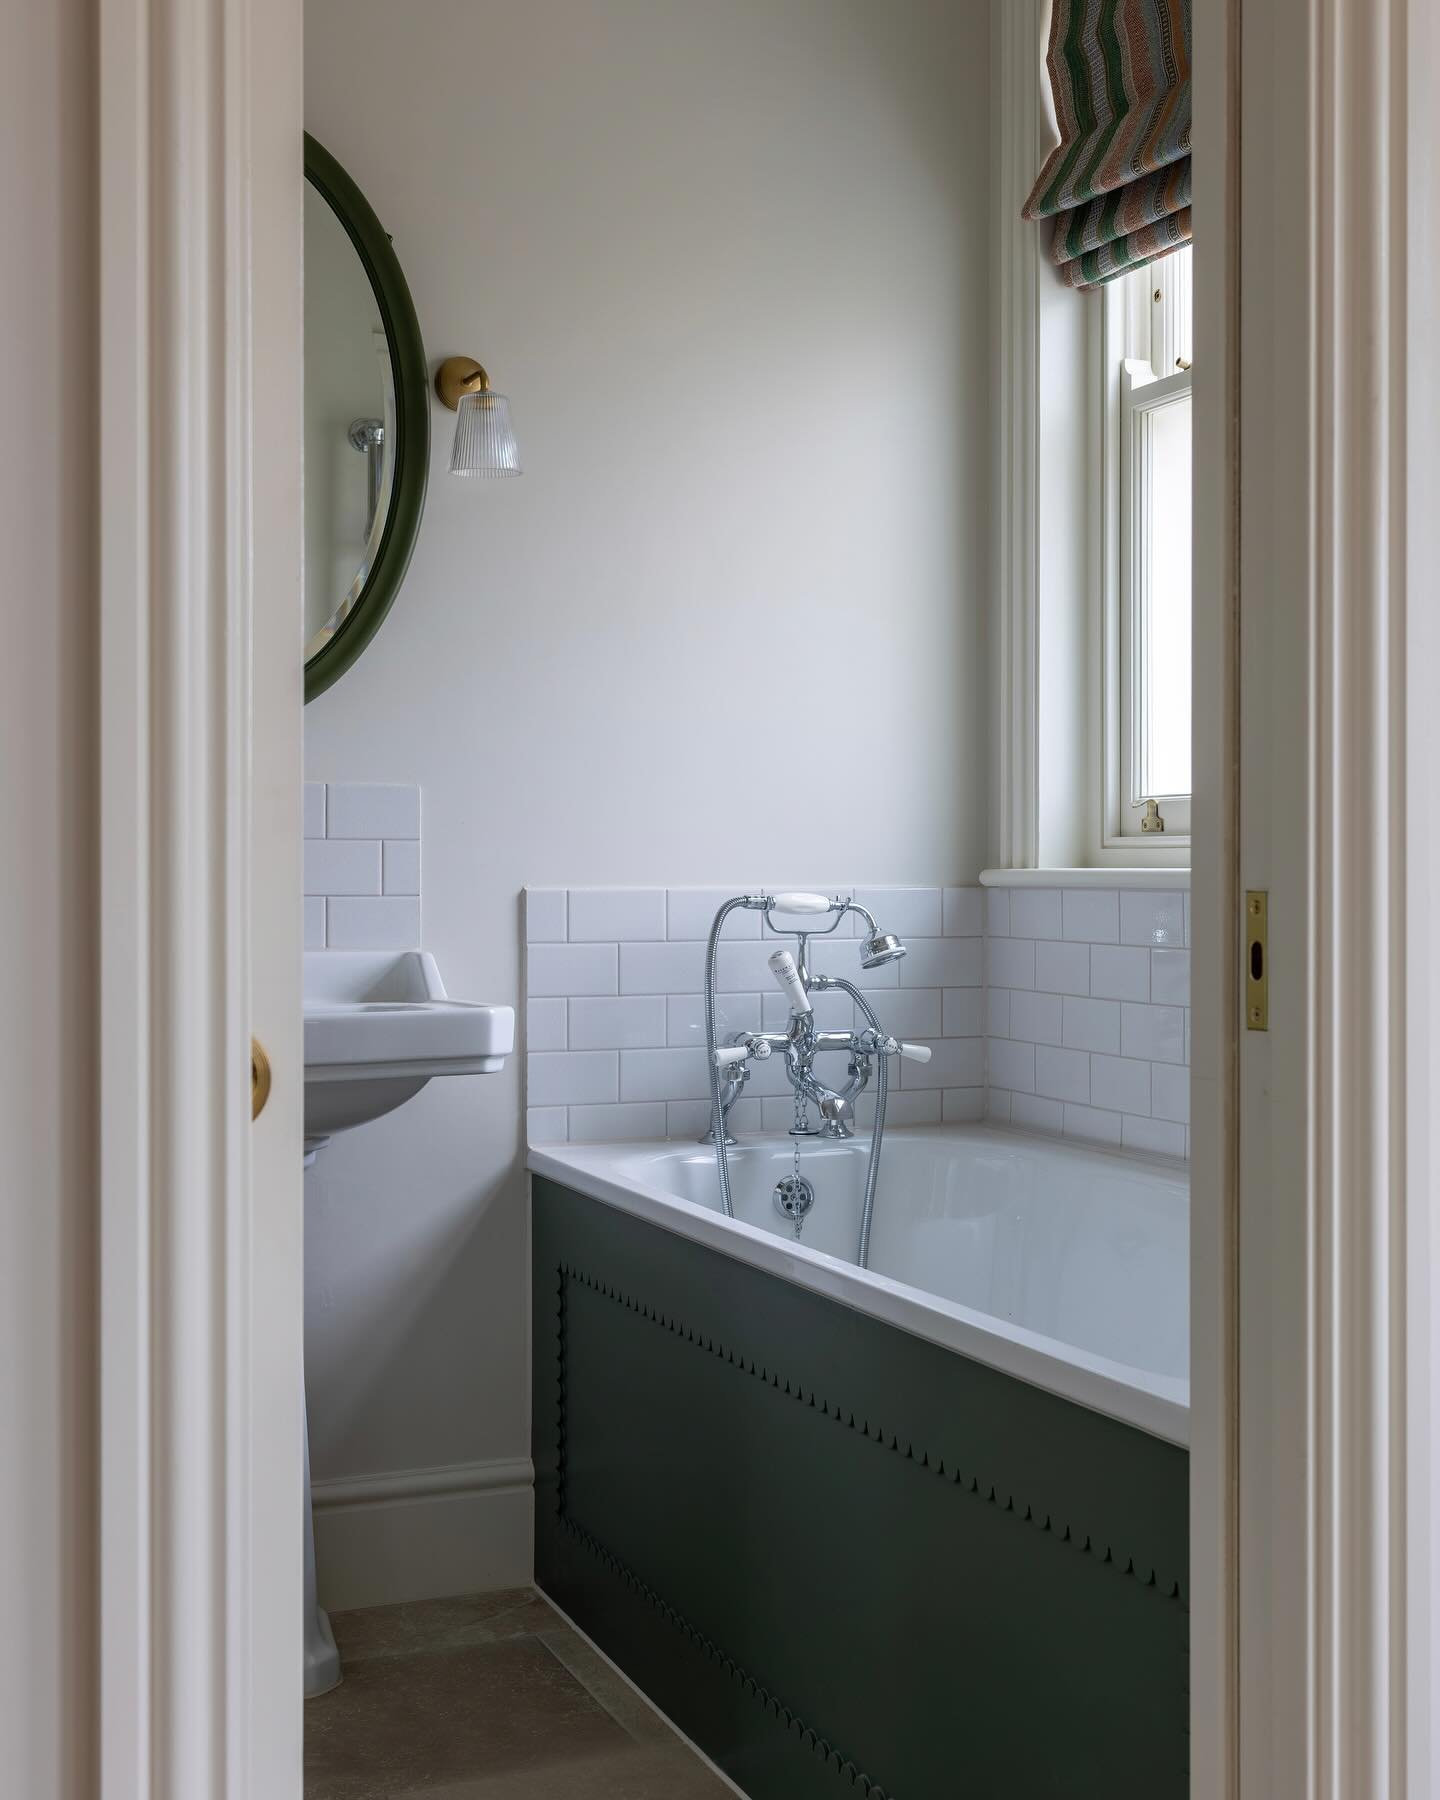 One of our new bespoke bath sides, in this recently completed renovation scheme.  A number of the other designs will be featured soon.  This shaker half moon finished in @farrowandball green smoke.  Richmond wall lights @corstonarchitecturaldetail st